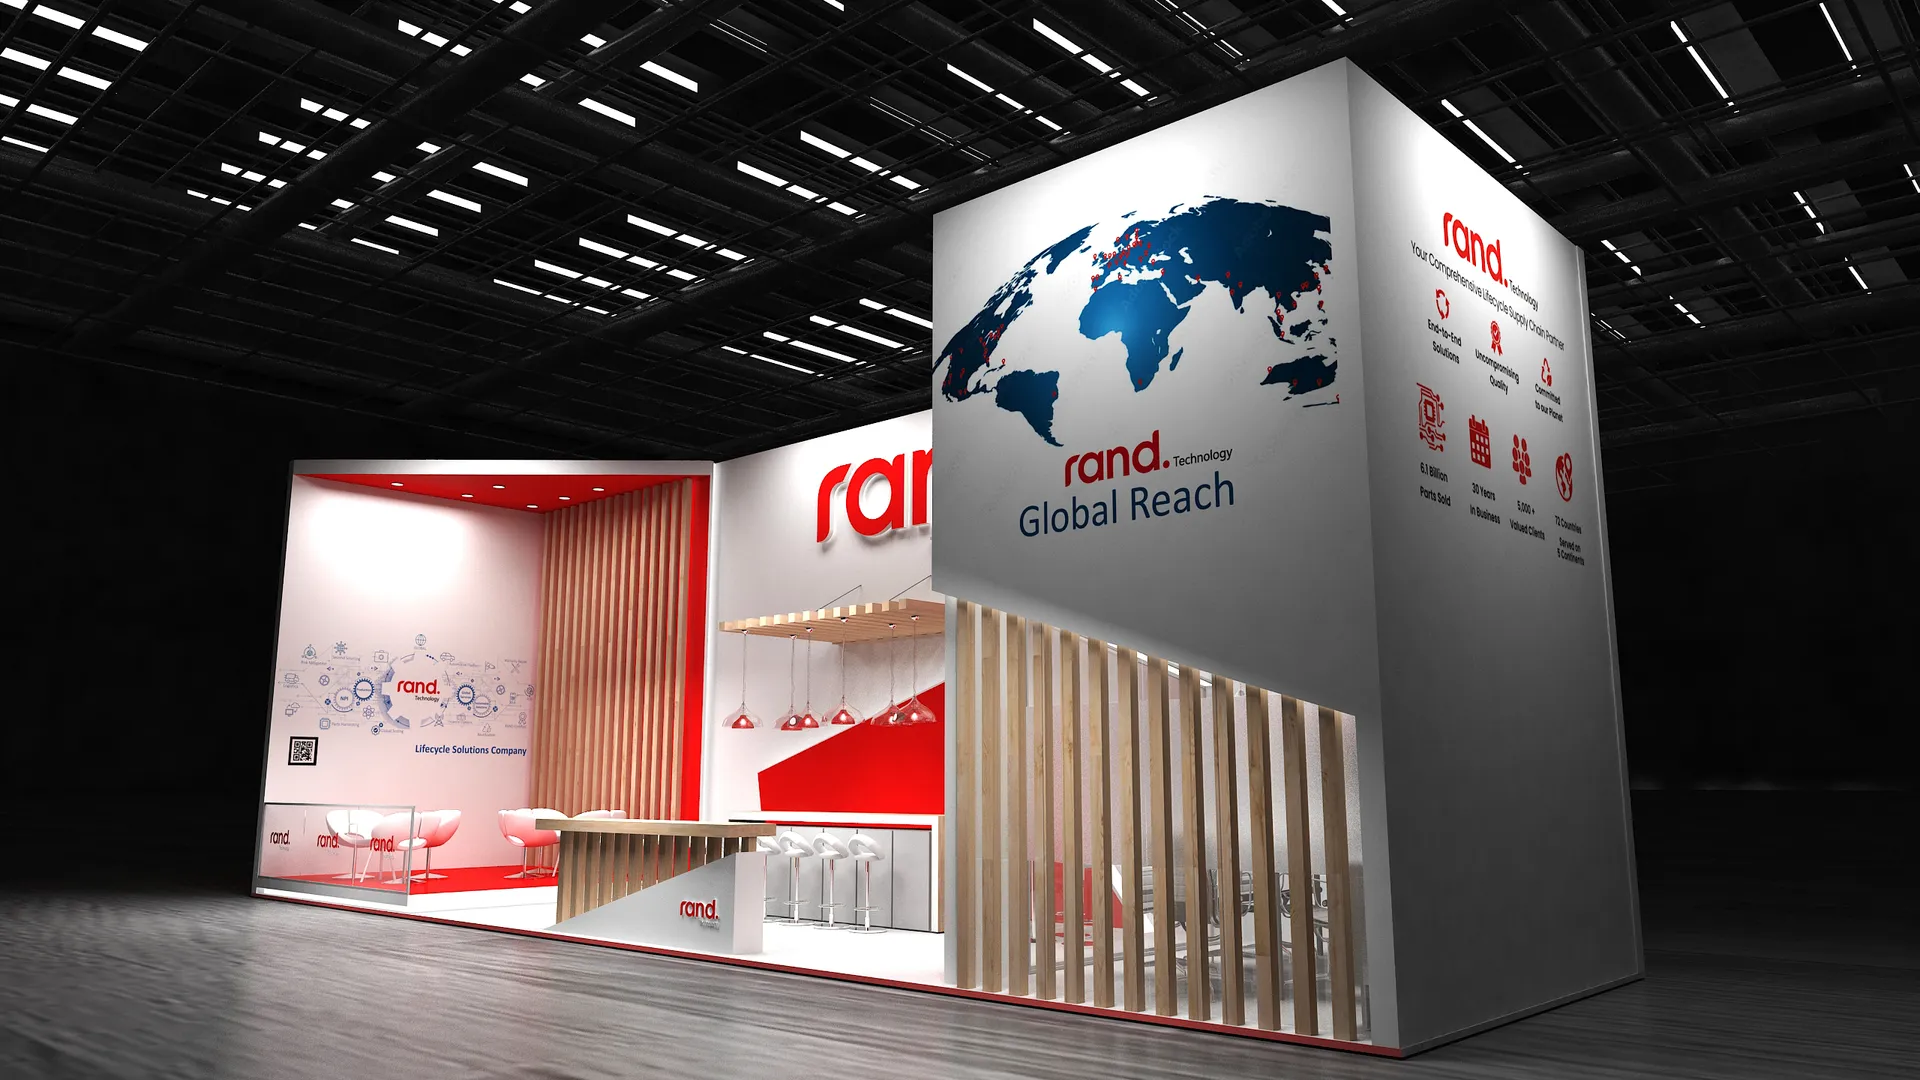 booth-design-projects/The Reaction Space/2024-03-20-20x40-INLINE-Project-34/rand_booth_v10_05-0upyi6.jpg